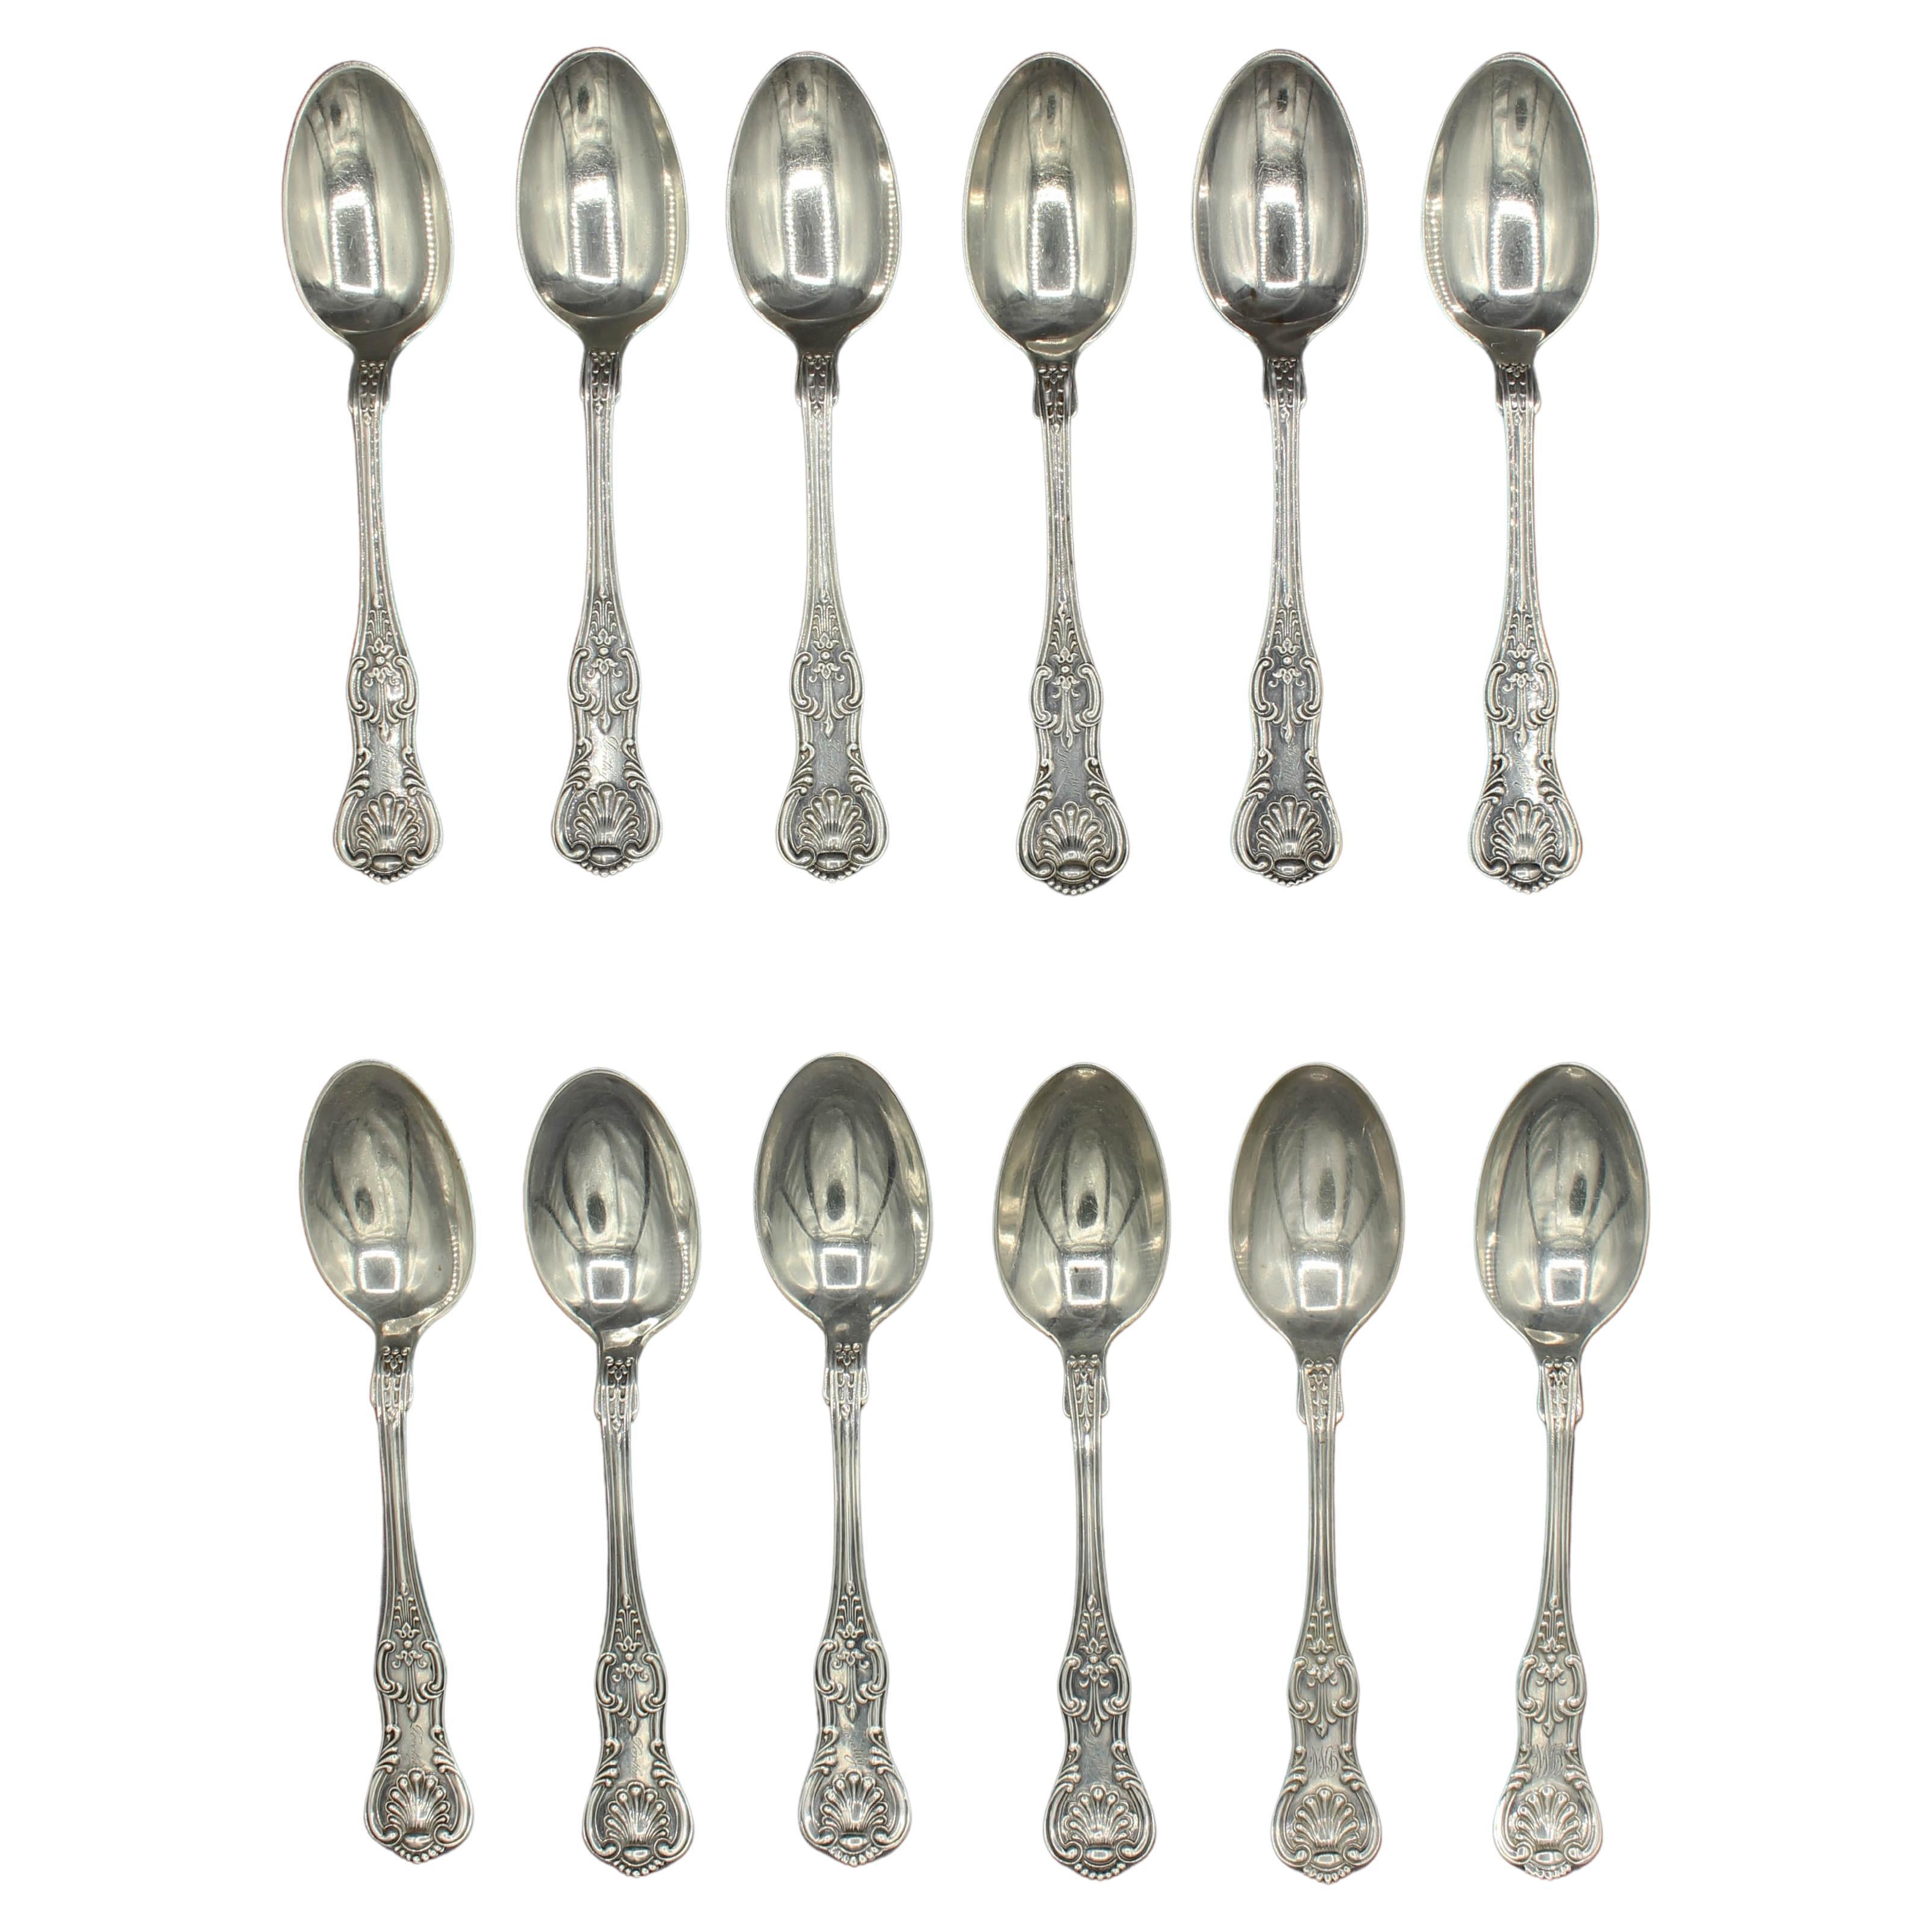 1890-96 Matched Set of 12 Sterling Teaspoons by Dominick & Haff